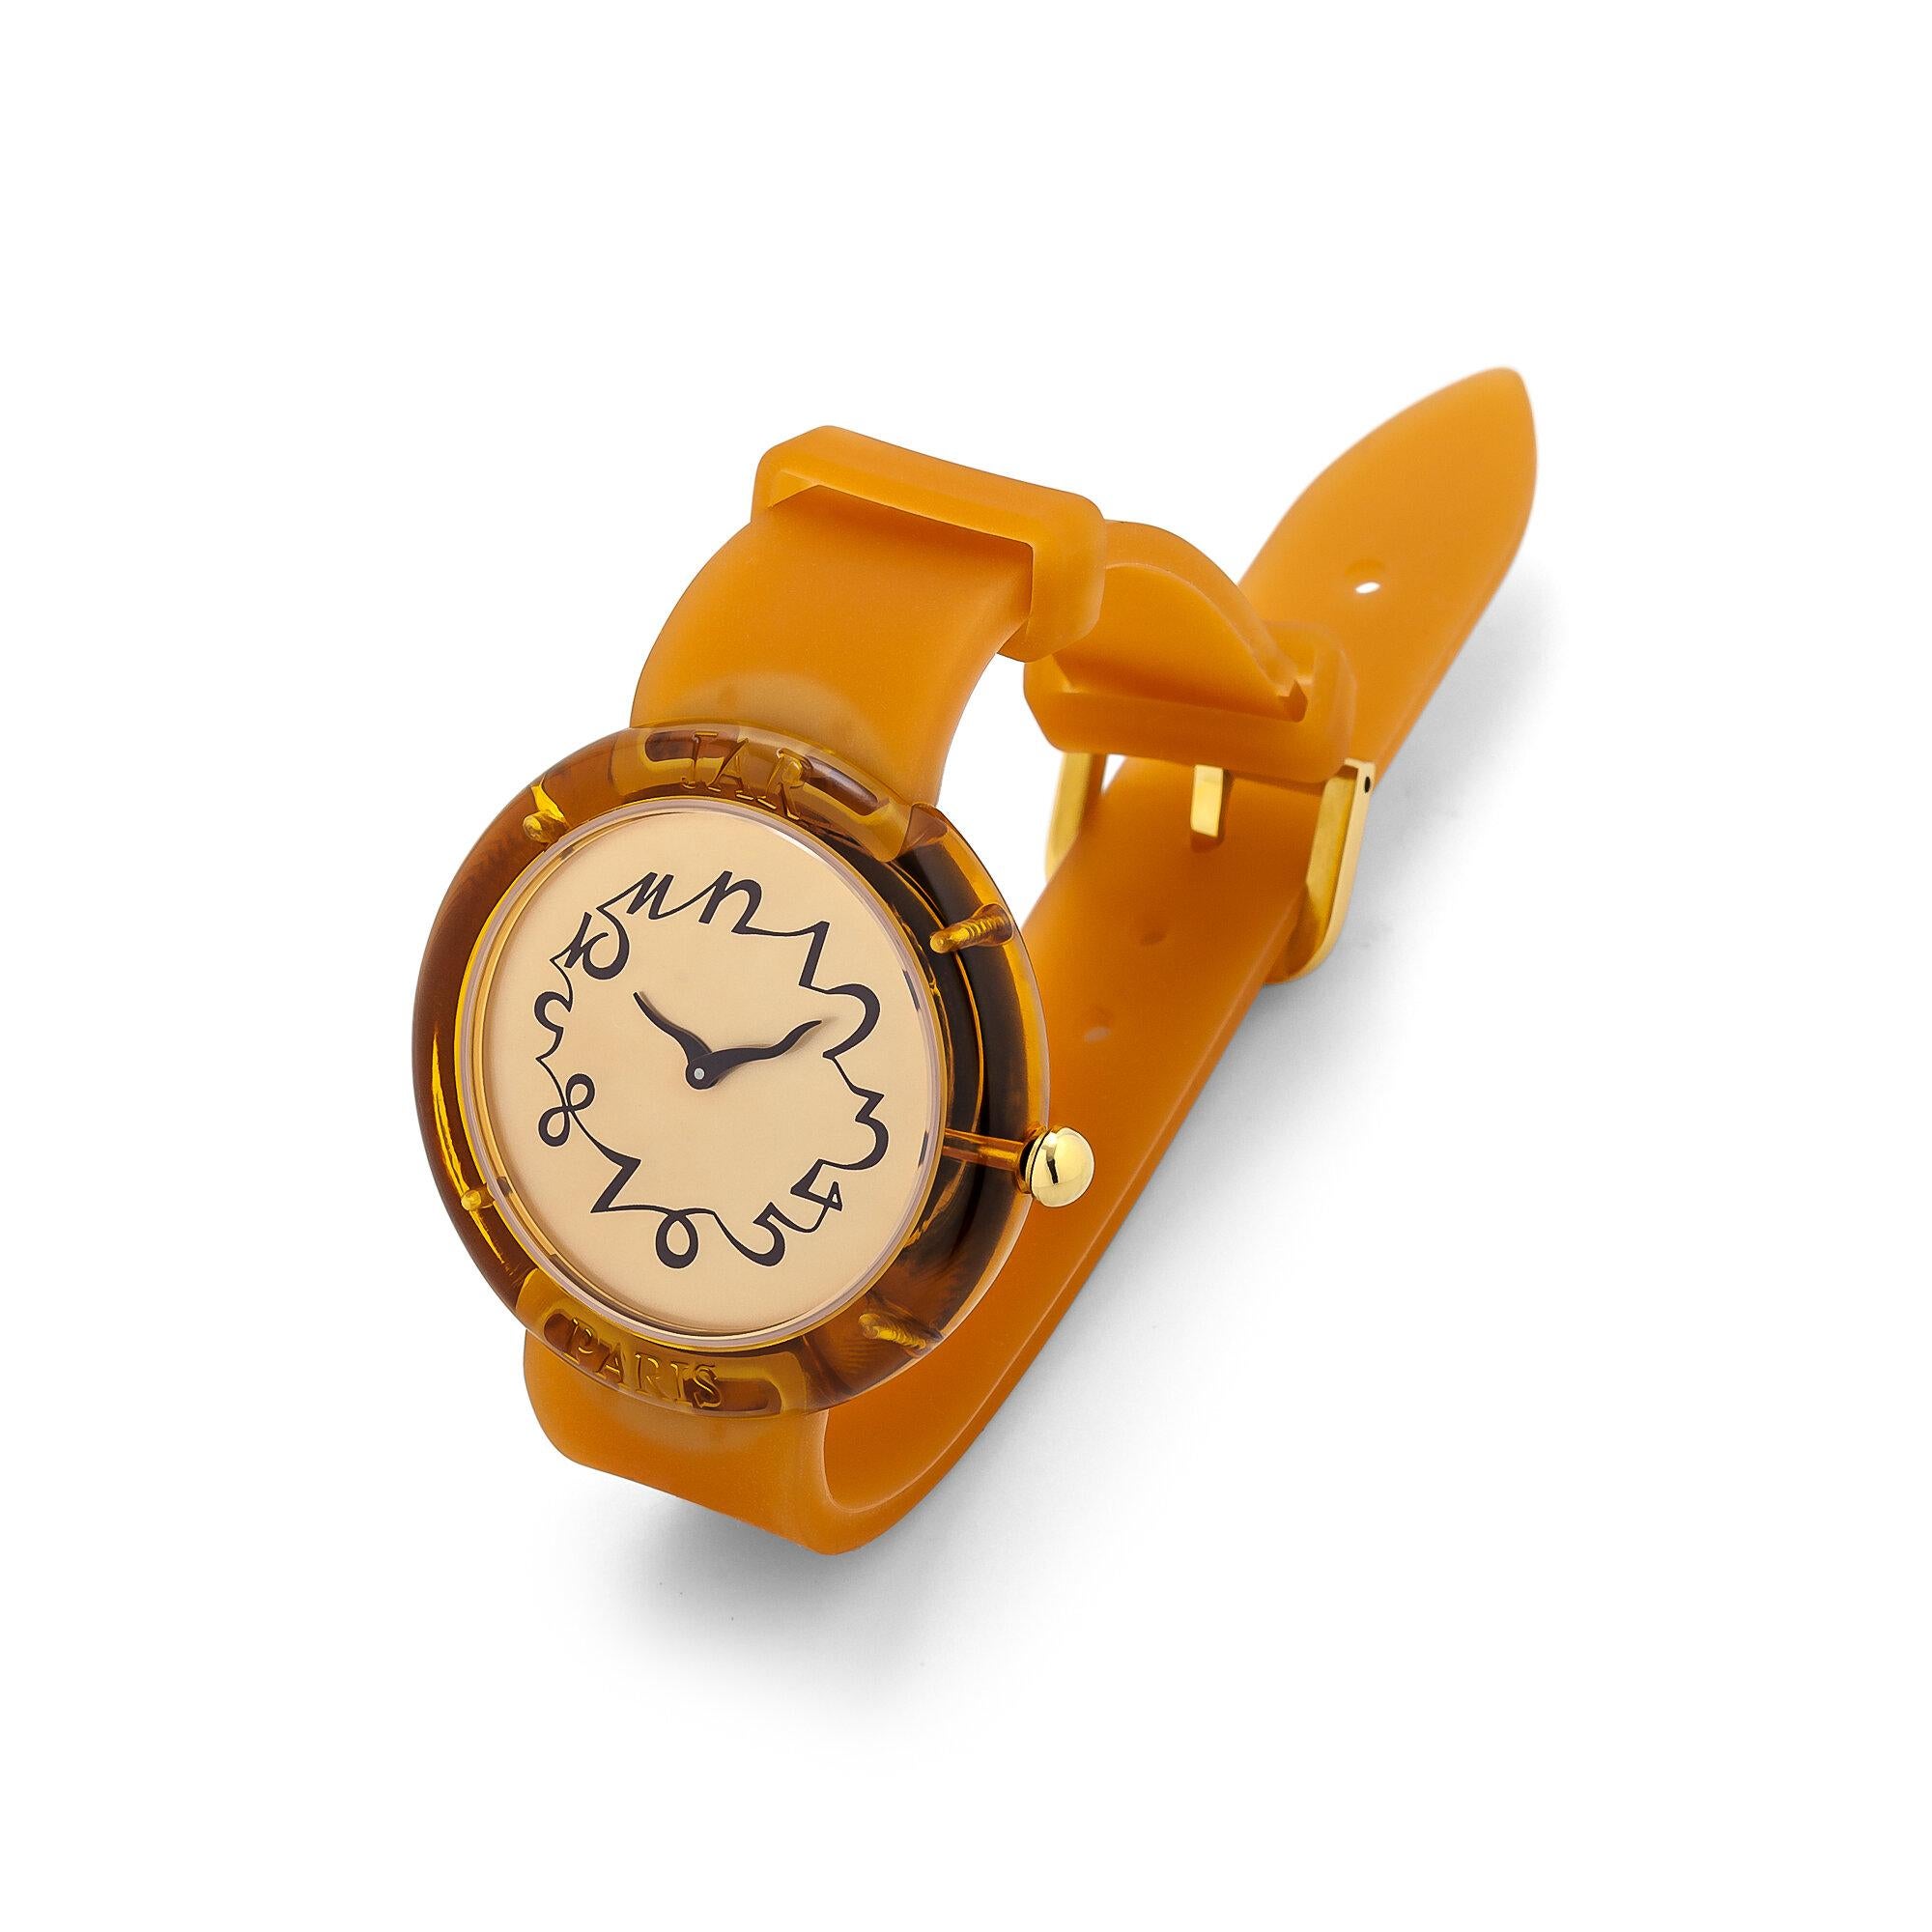 This JAR designed and collectible vintage watch from the Metropolitan Museum of Art collection is wearable fine art.  With a orange silicone watch strap, a champagne colored face, and a cognac hued perspex bezel, this watch was masterfully designed.